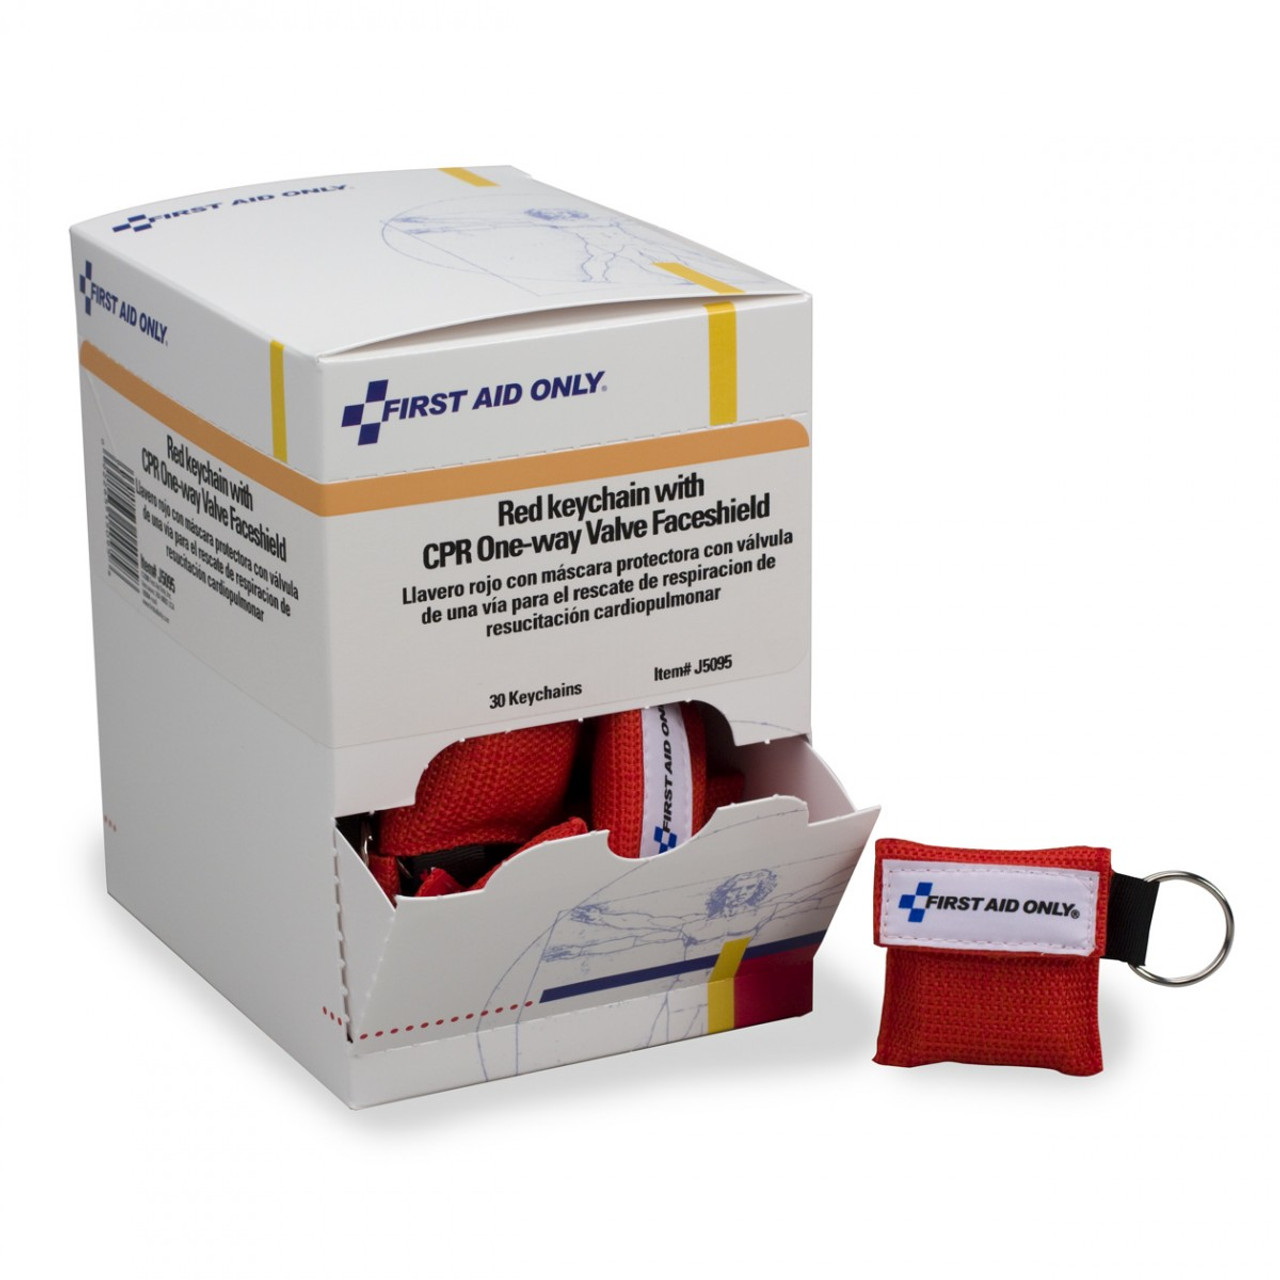 First Aid Only FA-J5095 CPR Mask Keychain, 30 Per Box